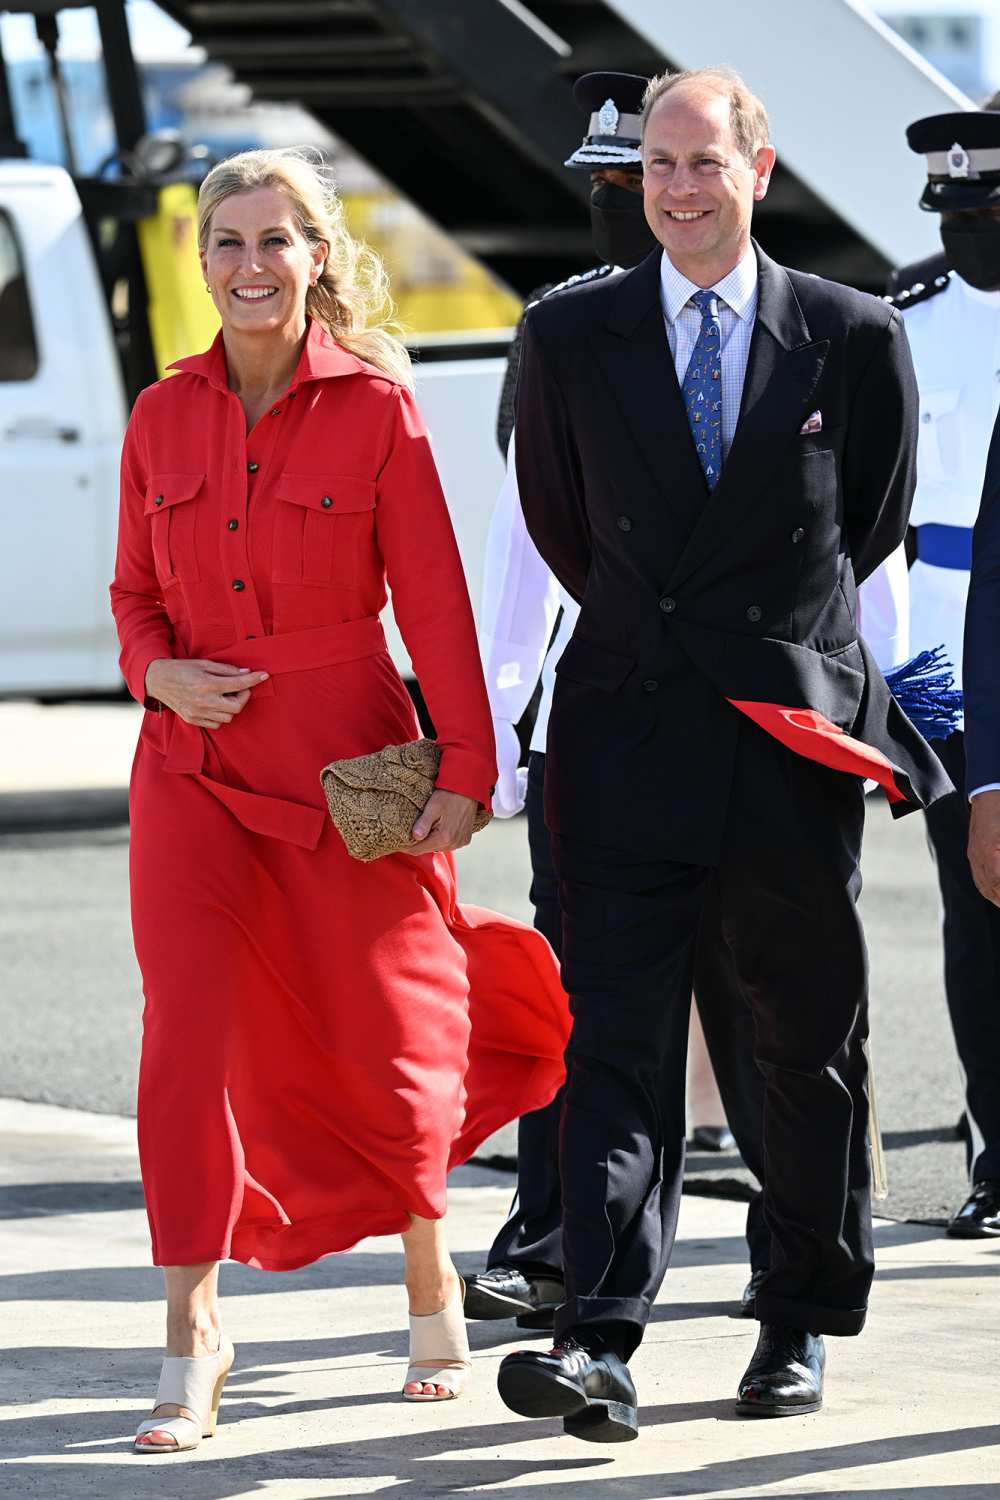 April 2022 Prince Edward and Sophie Countess of Wessex's Complete Relationship Timeline